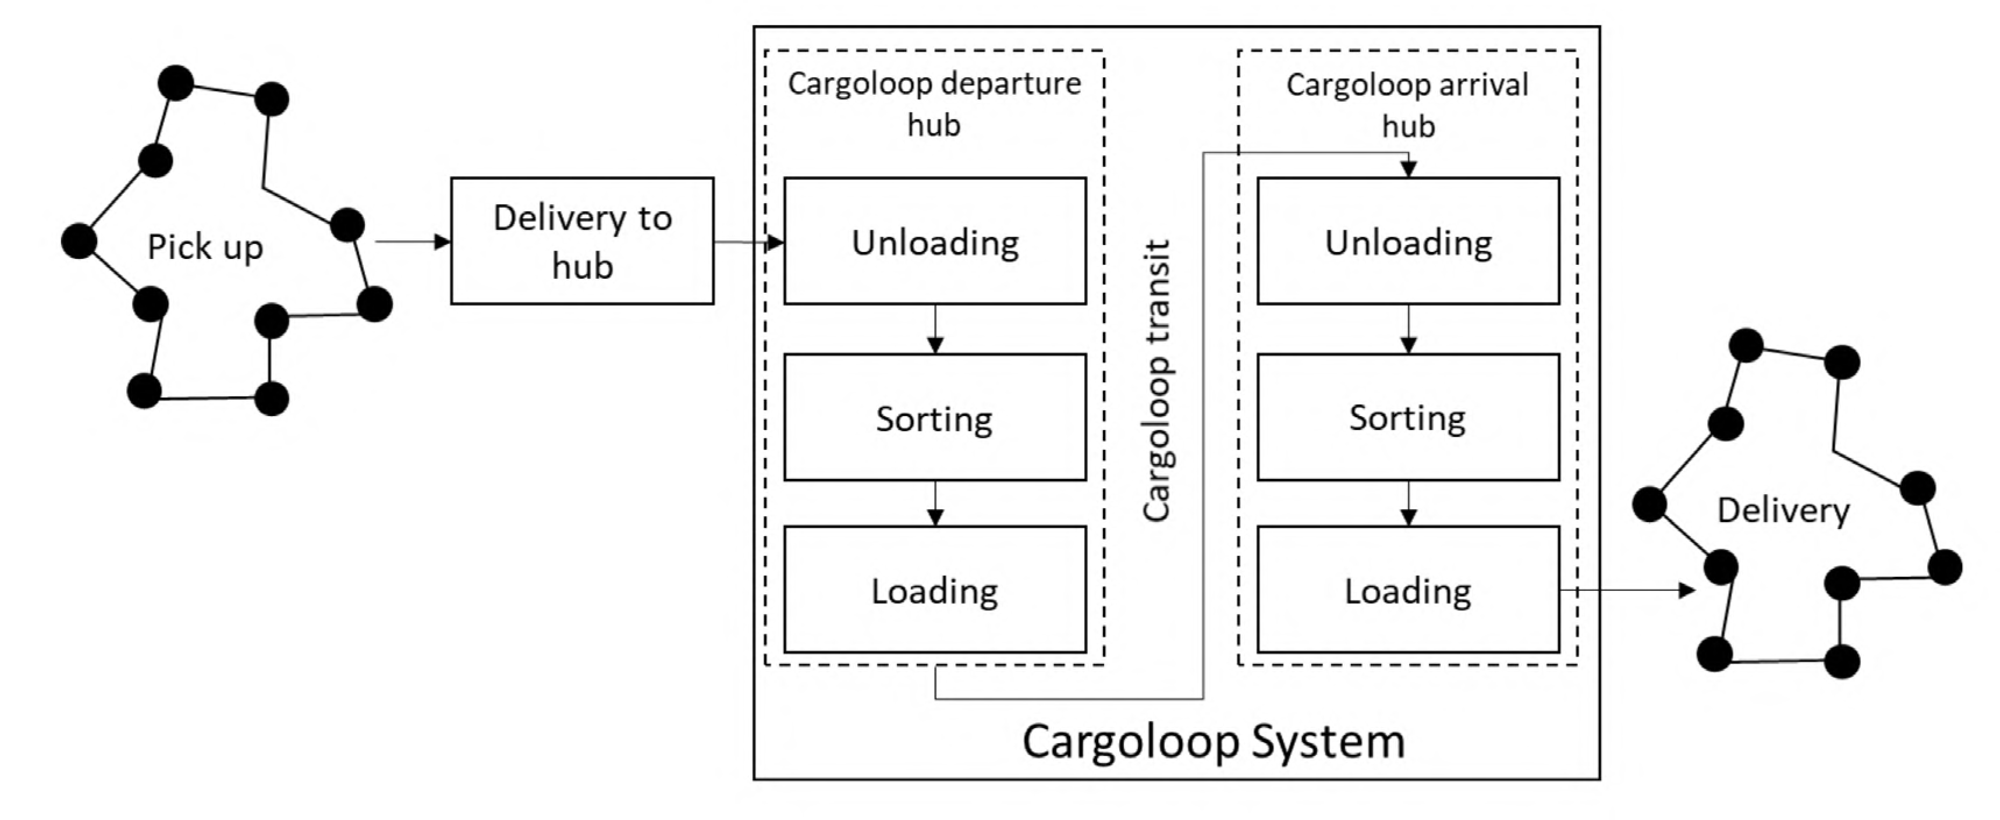 Cargo hyperloop system operations in the delivery process.